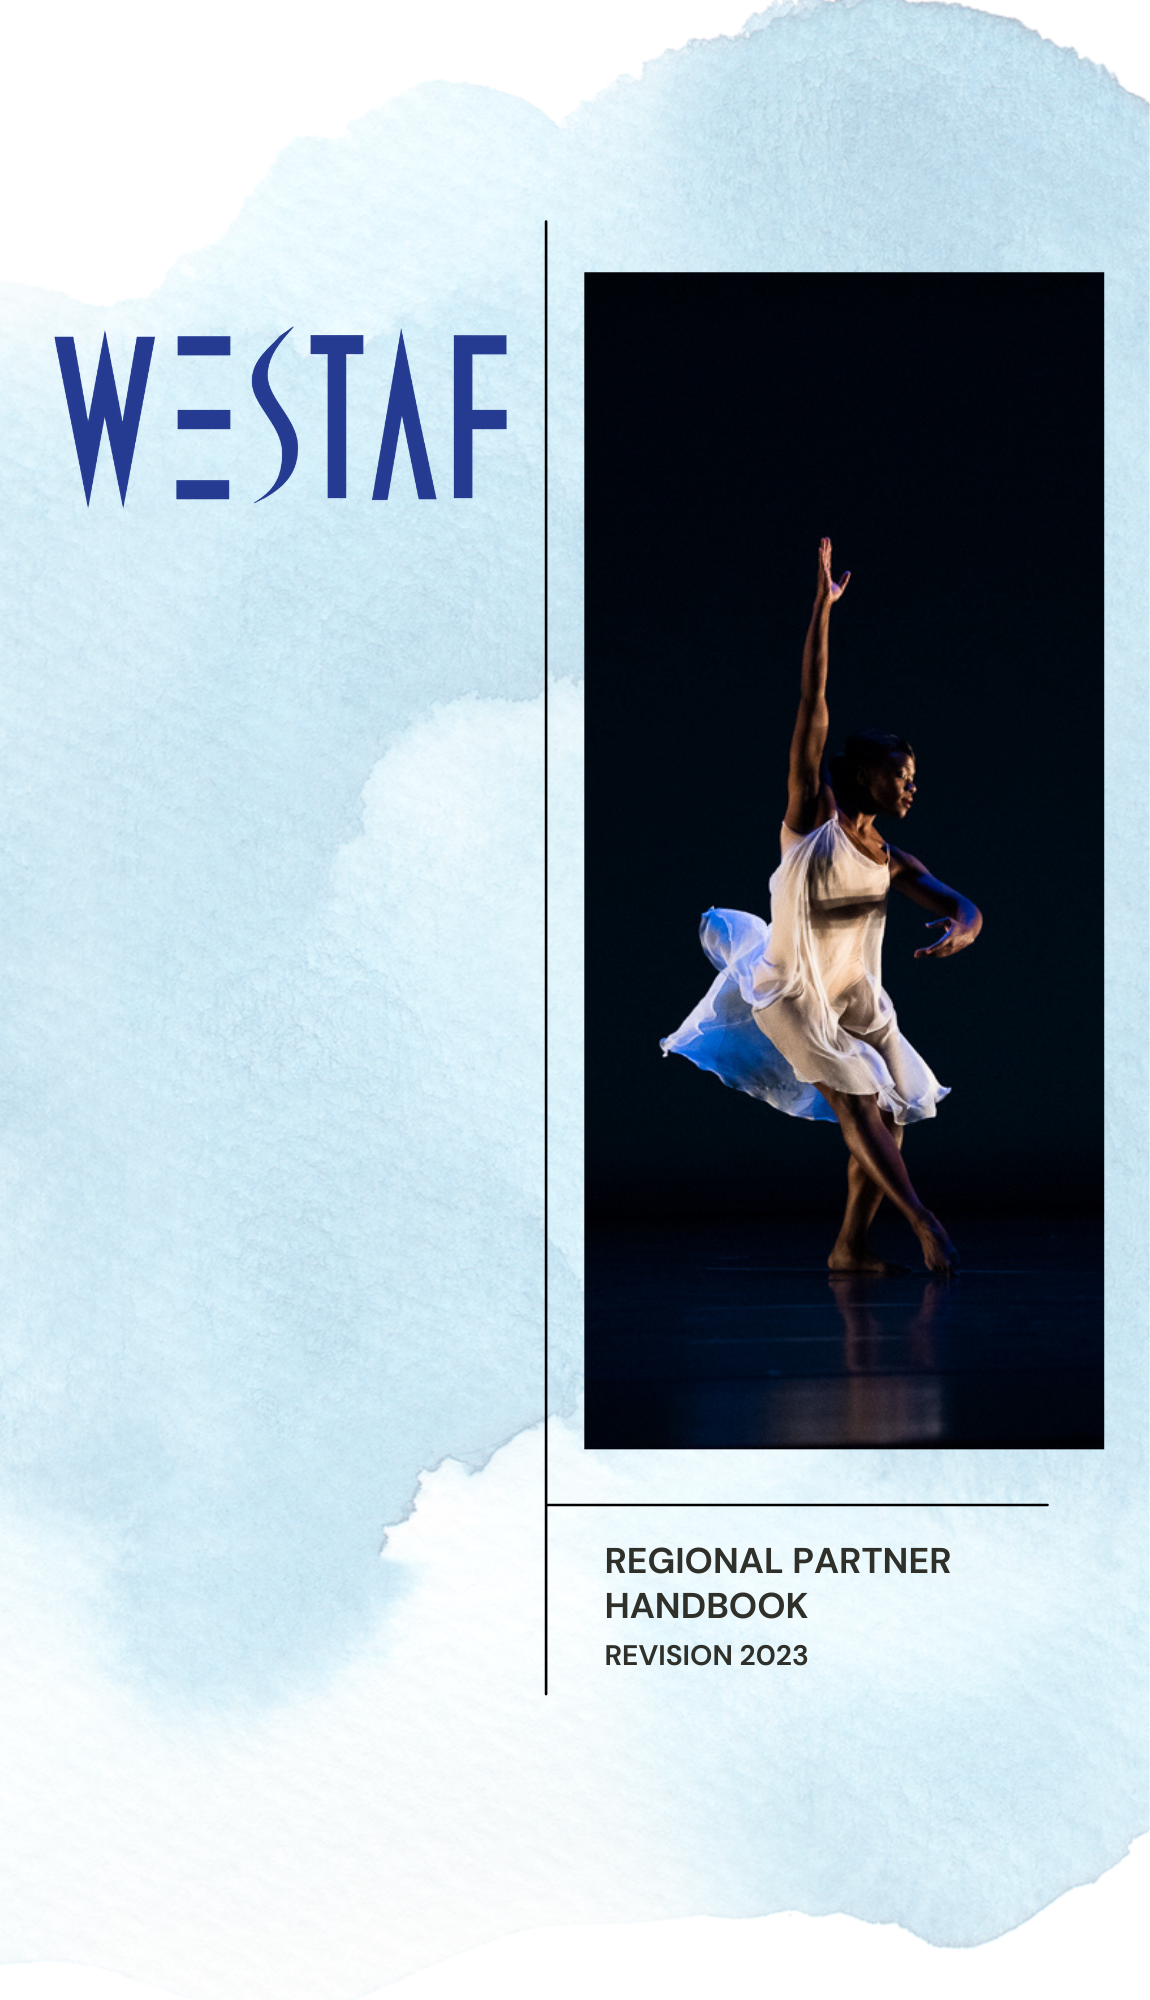 WESTAF's Regional Partner Handbook Cover - blue watercolor background with the WESTAF logo and a dancer in a white dress. Text reads Regional Partner Handbook, Revision 2023